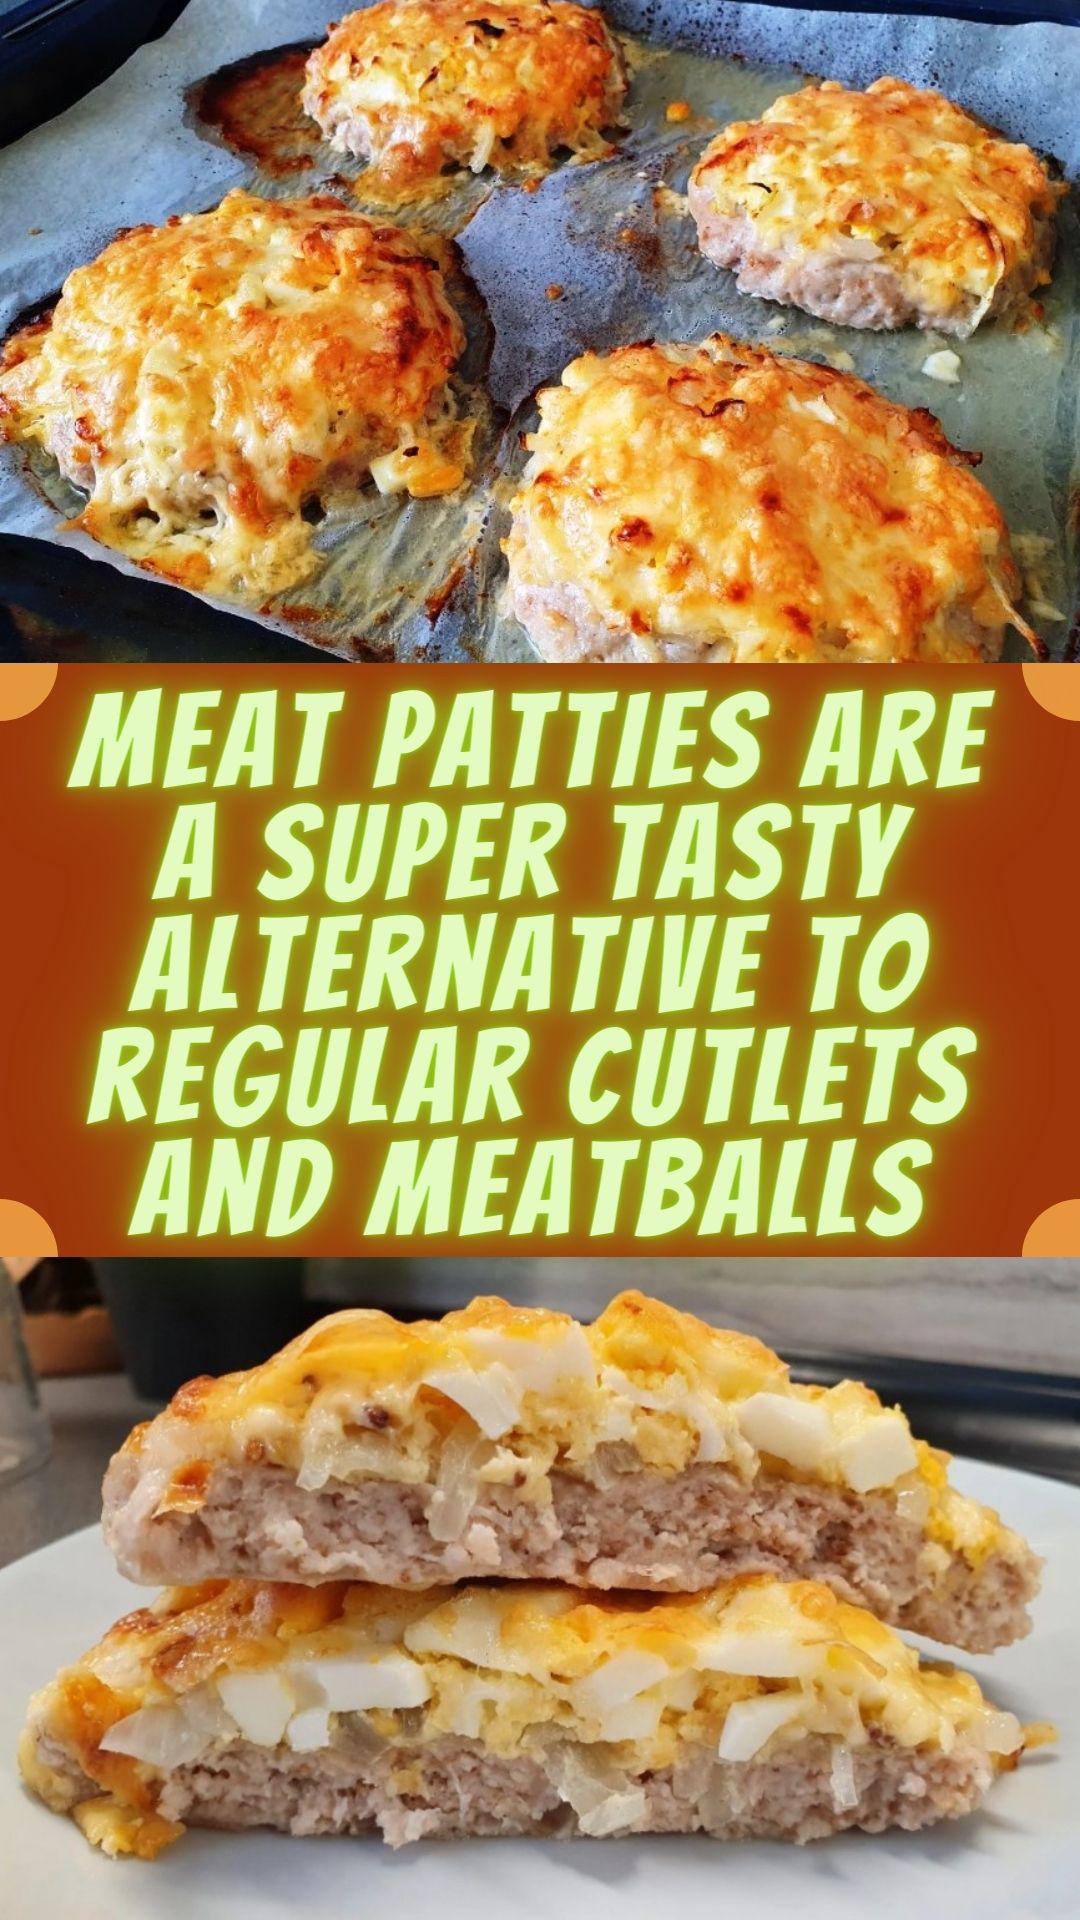 Meat patties are a super tasty alternative to regular cutlets and meatballs